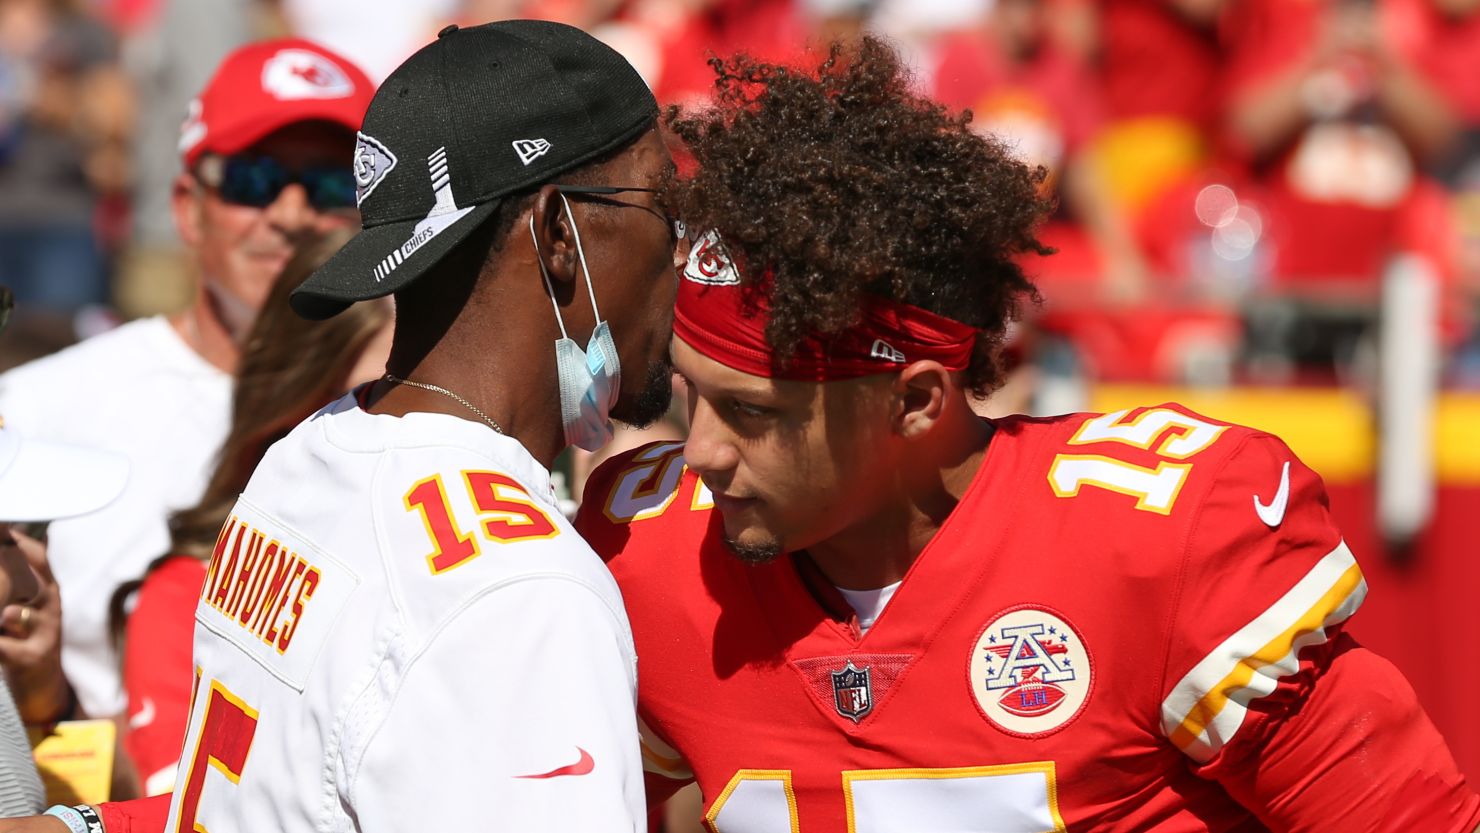 Kansas City Chiefs quarterback Patrick Mahomes hugs his dad before a game against the Los Angeles Chargers on September 26, 2021.